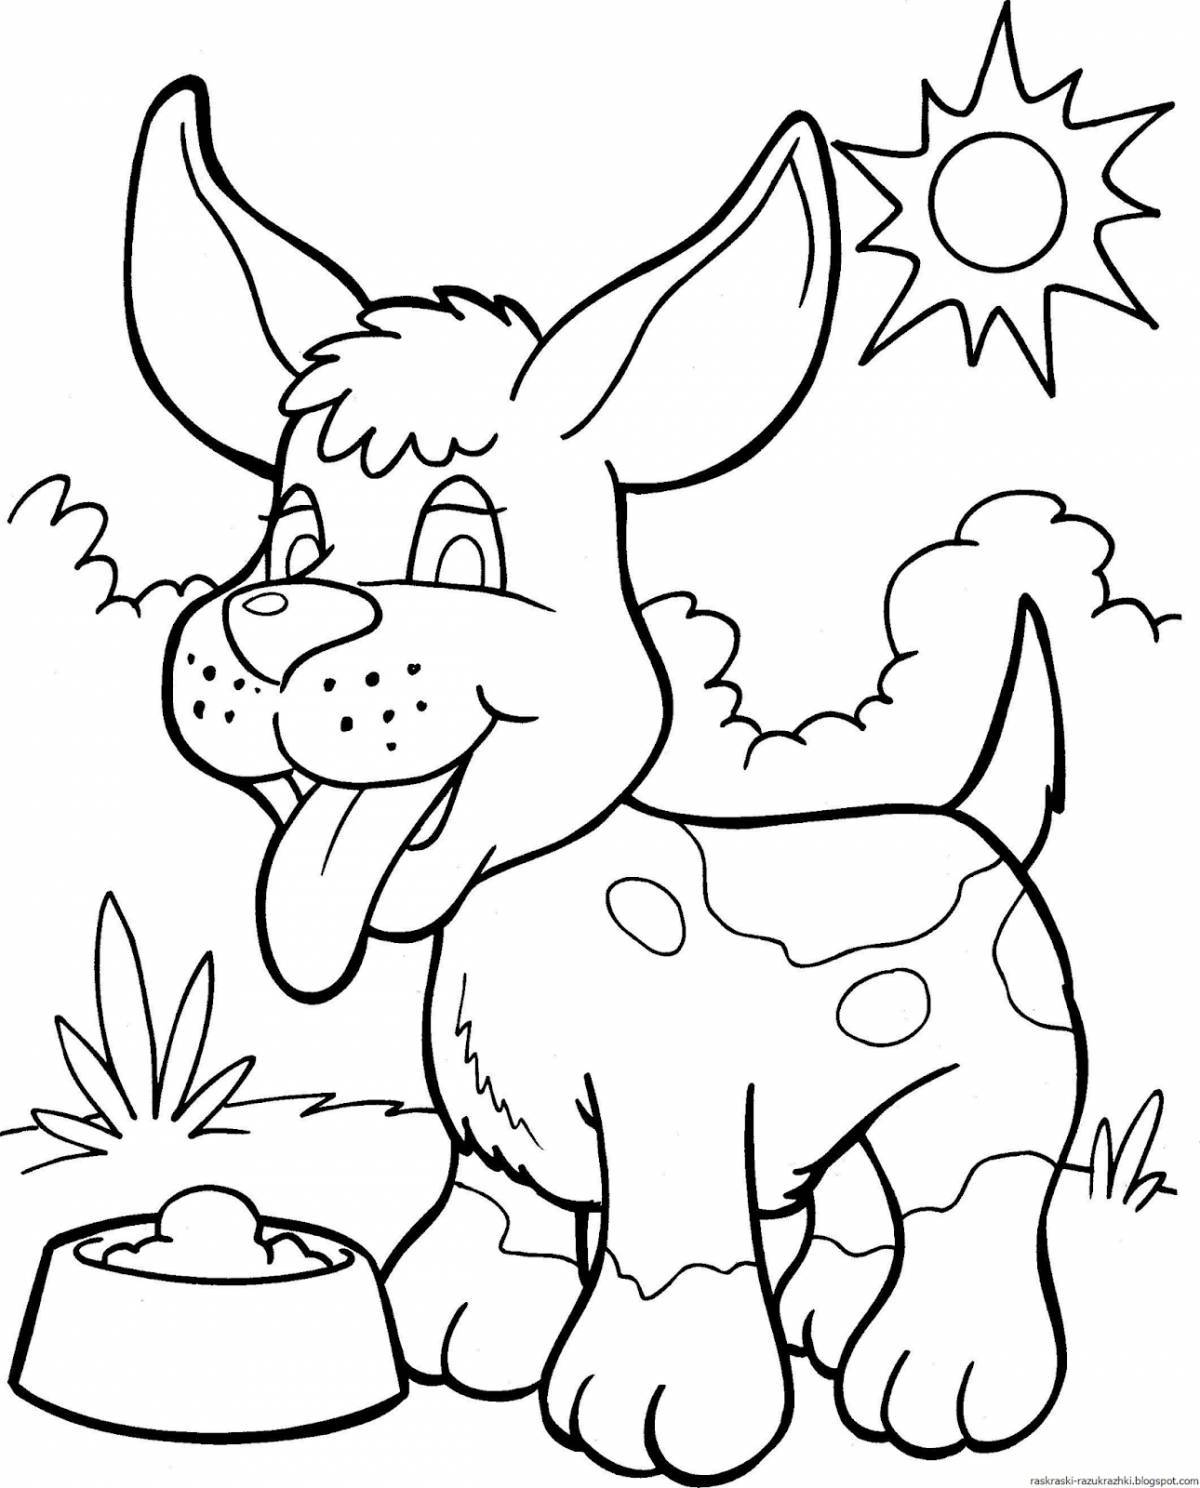 Magic animal coloring pages for kids 5-7 years old